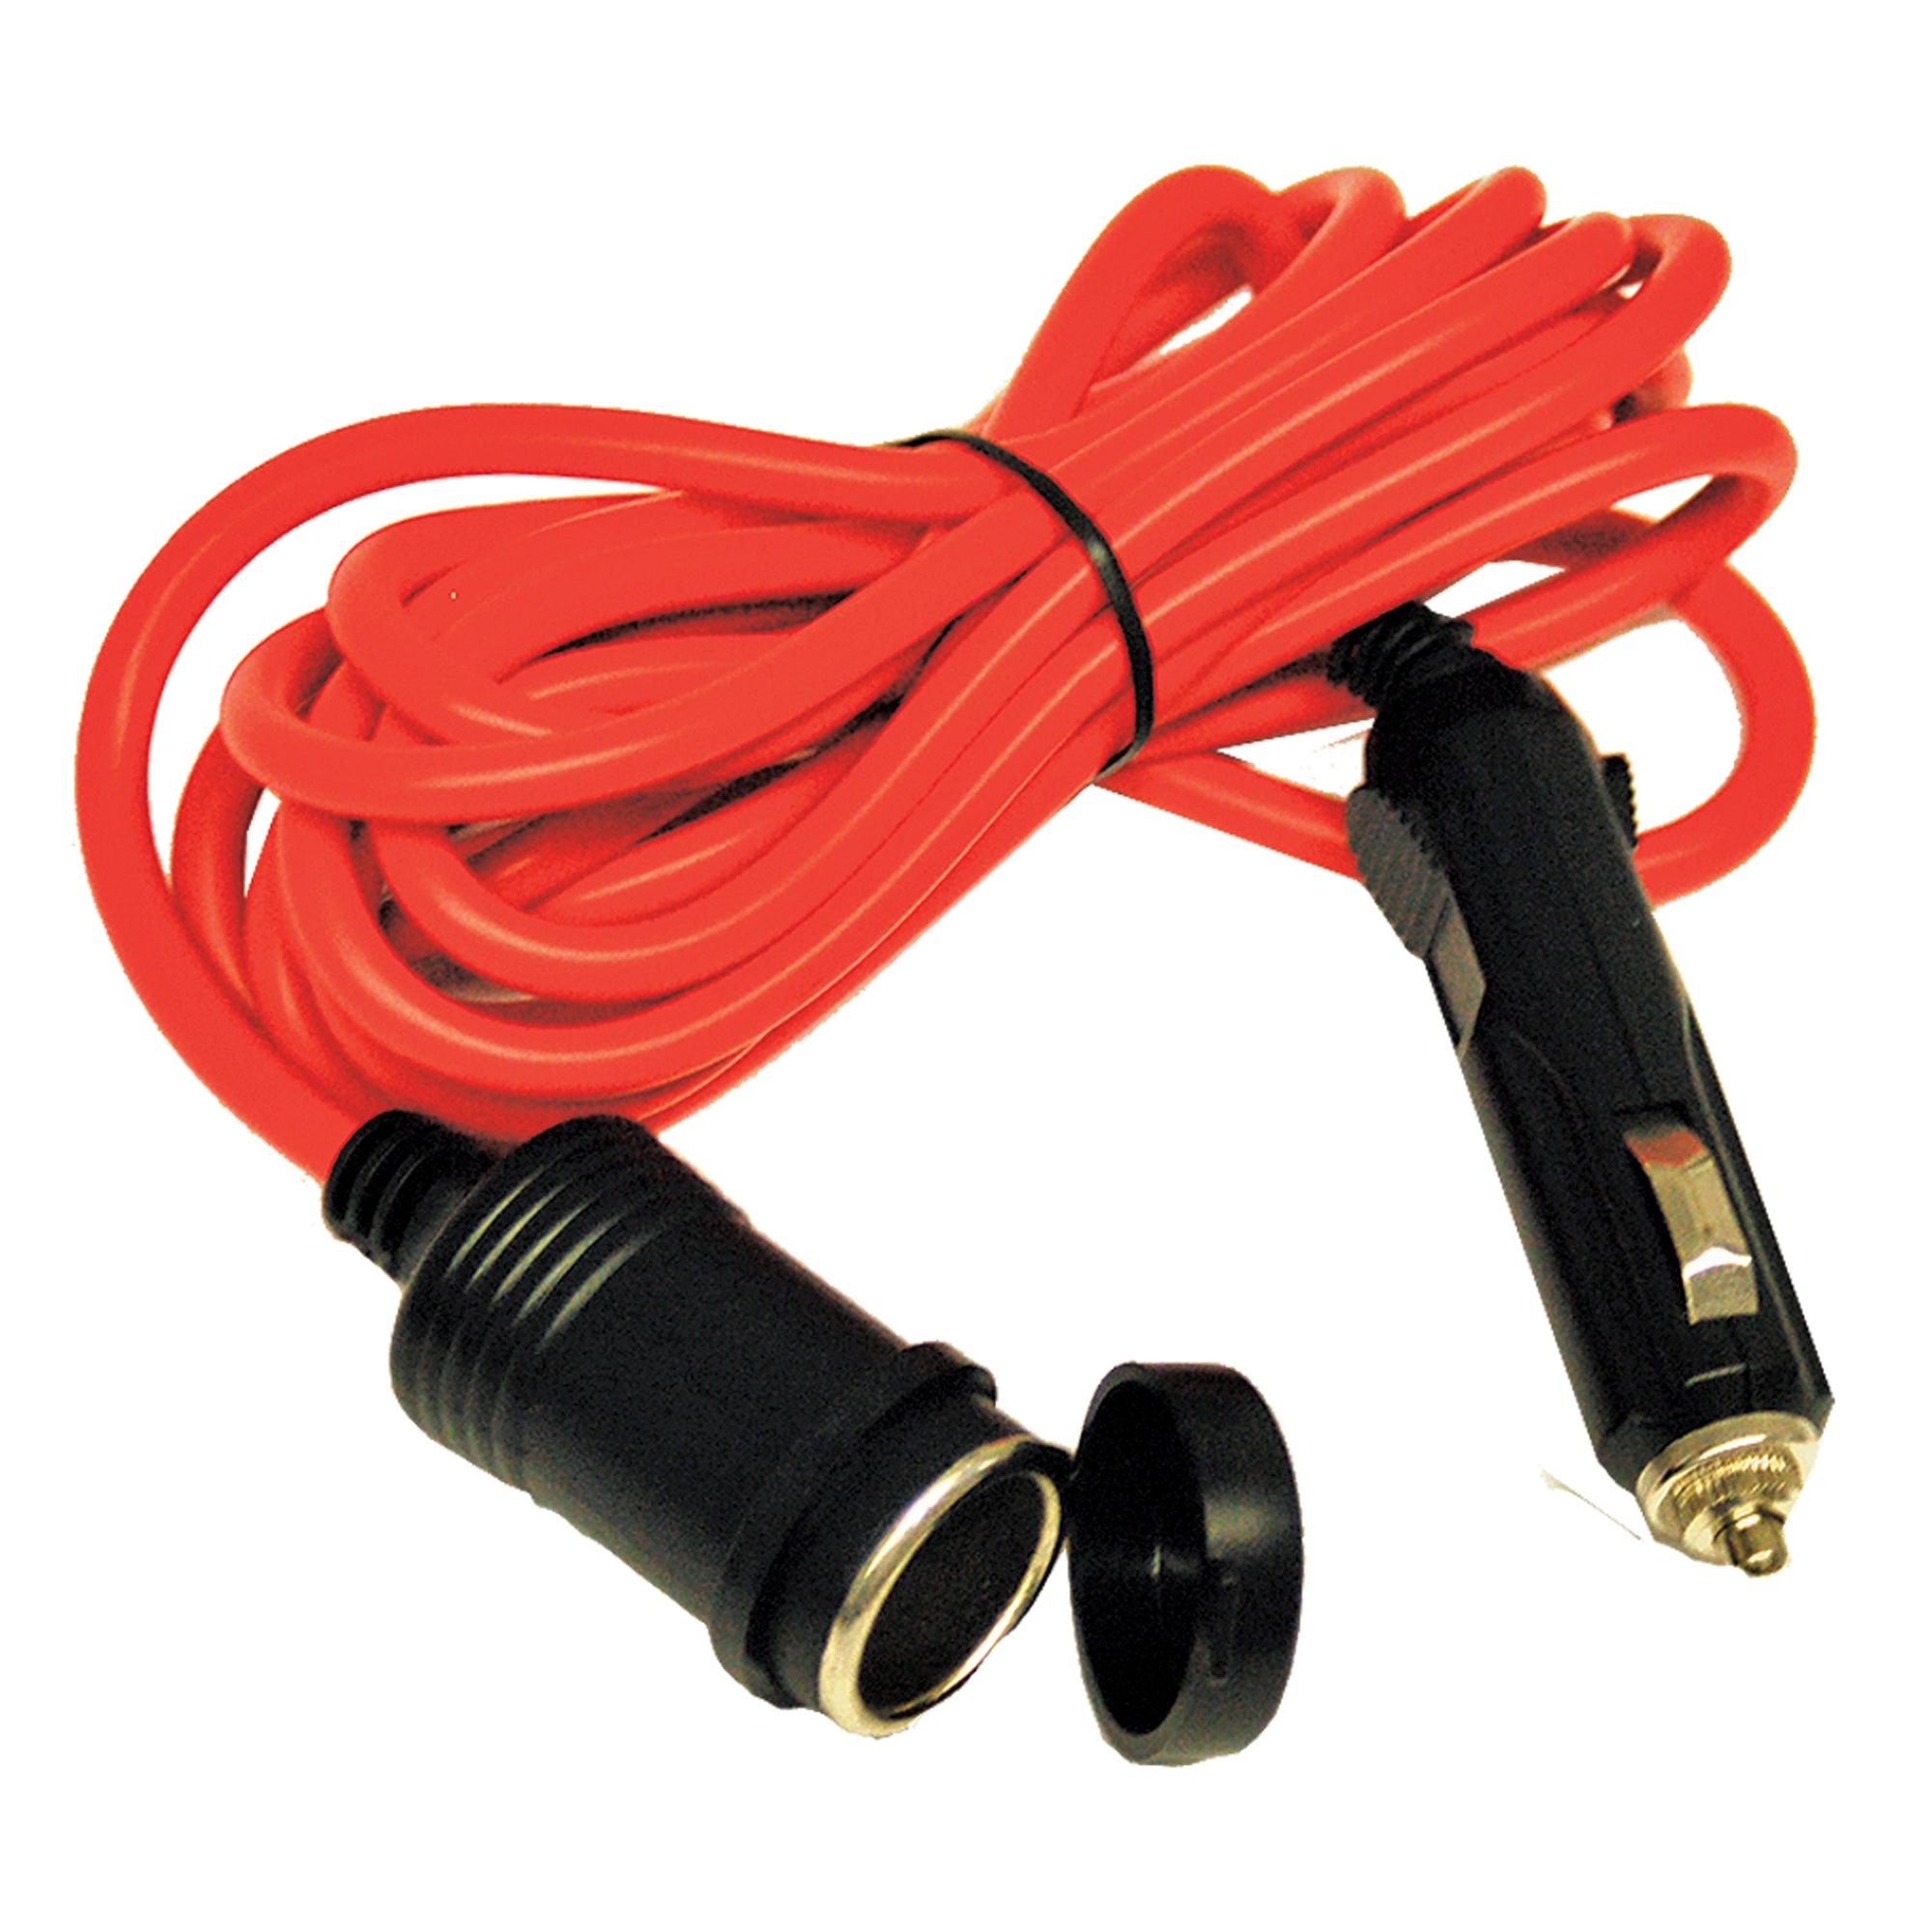 Prime Products 08-0919 10' Extension Cord with Dust Cap